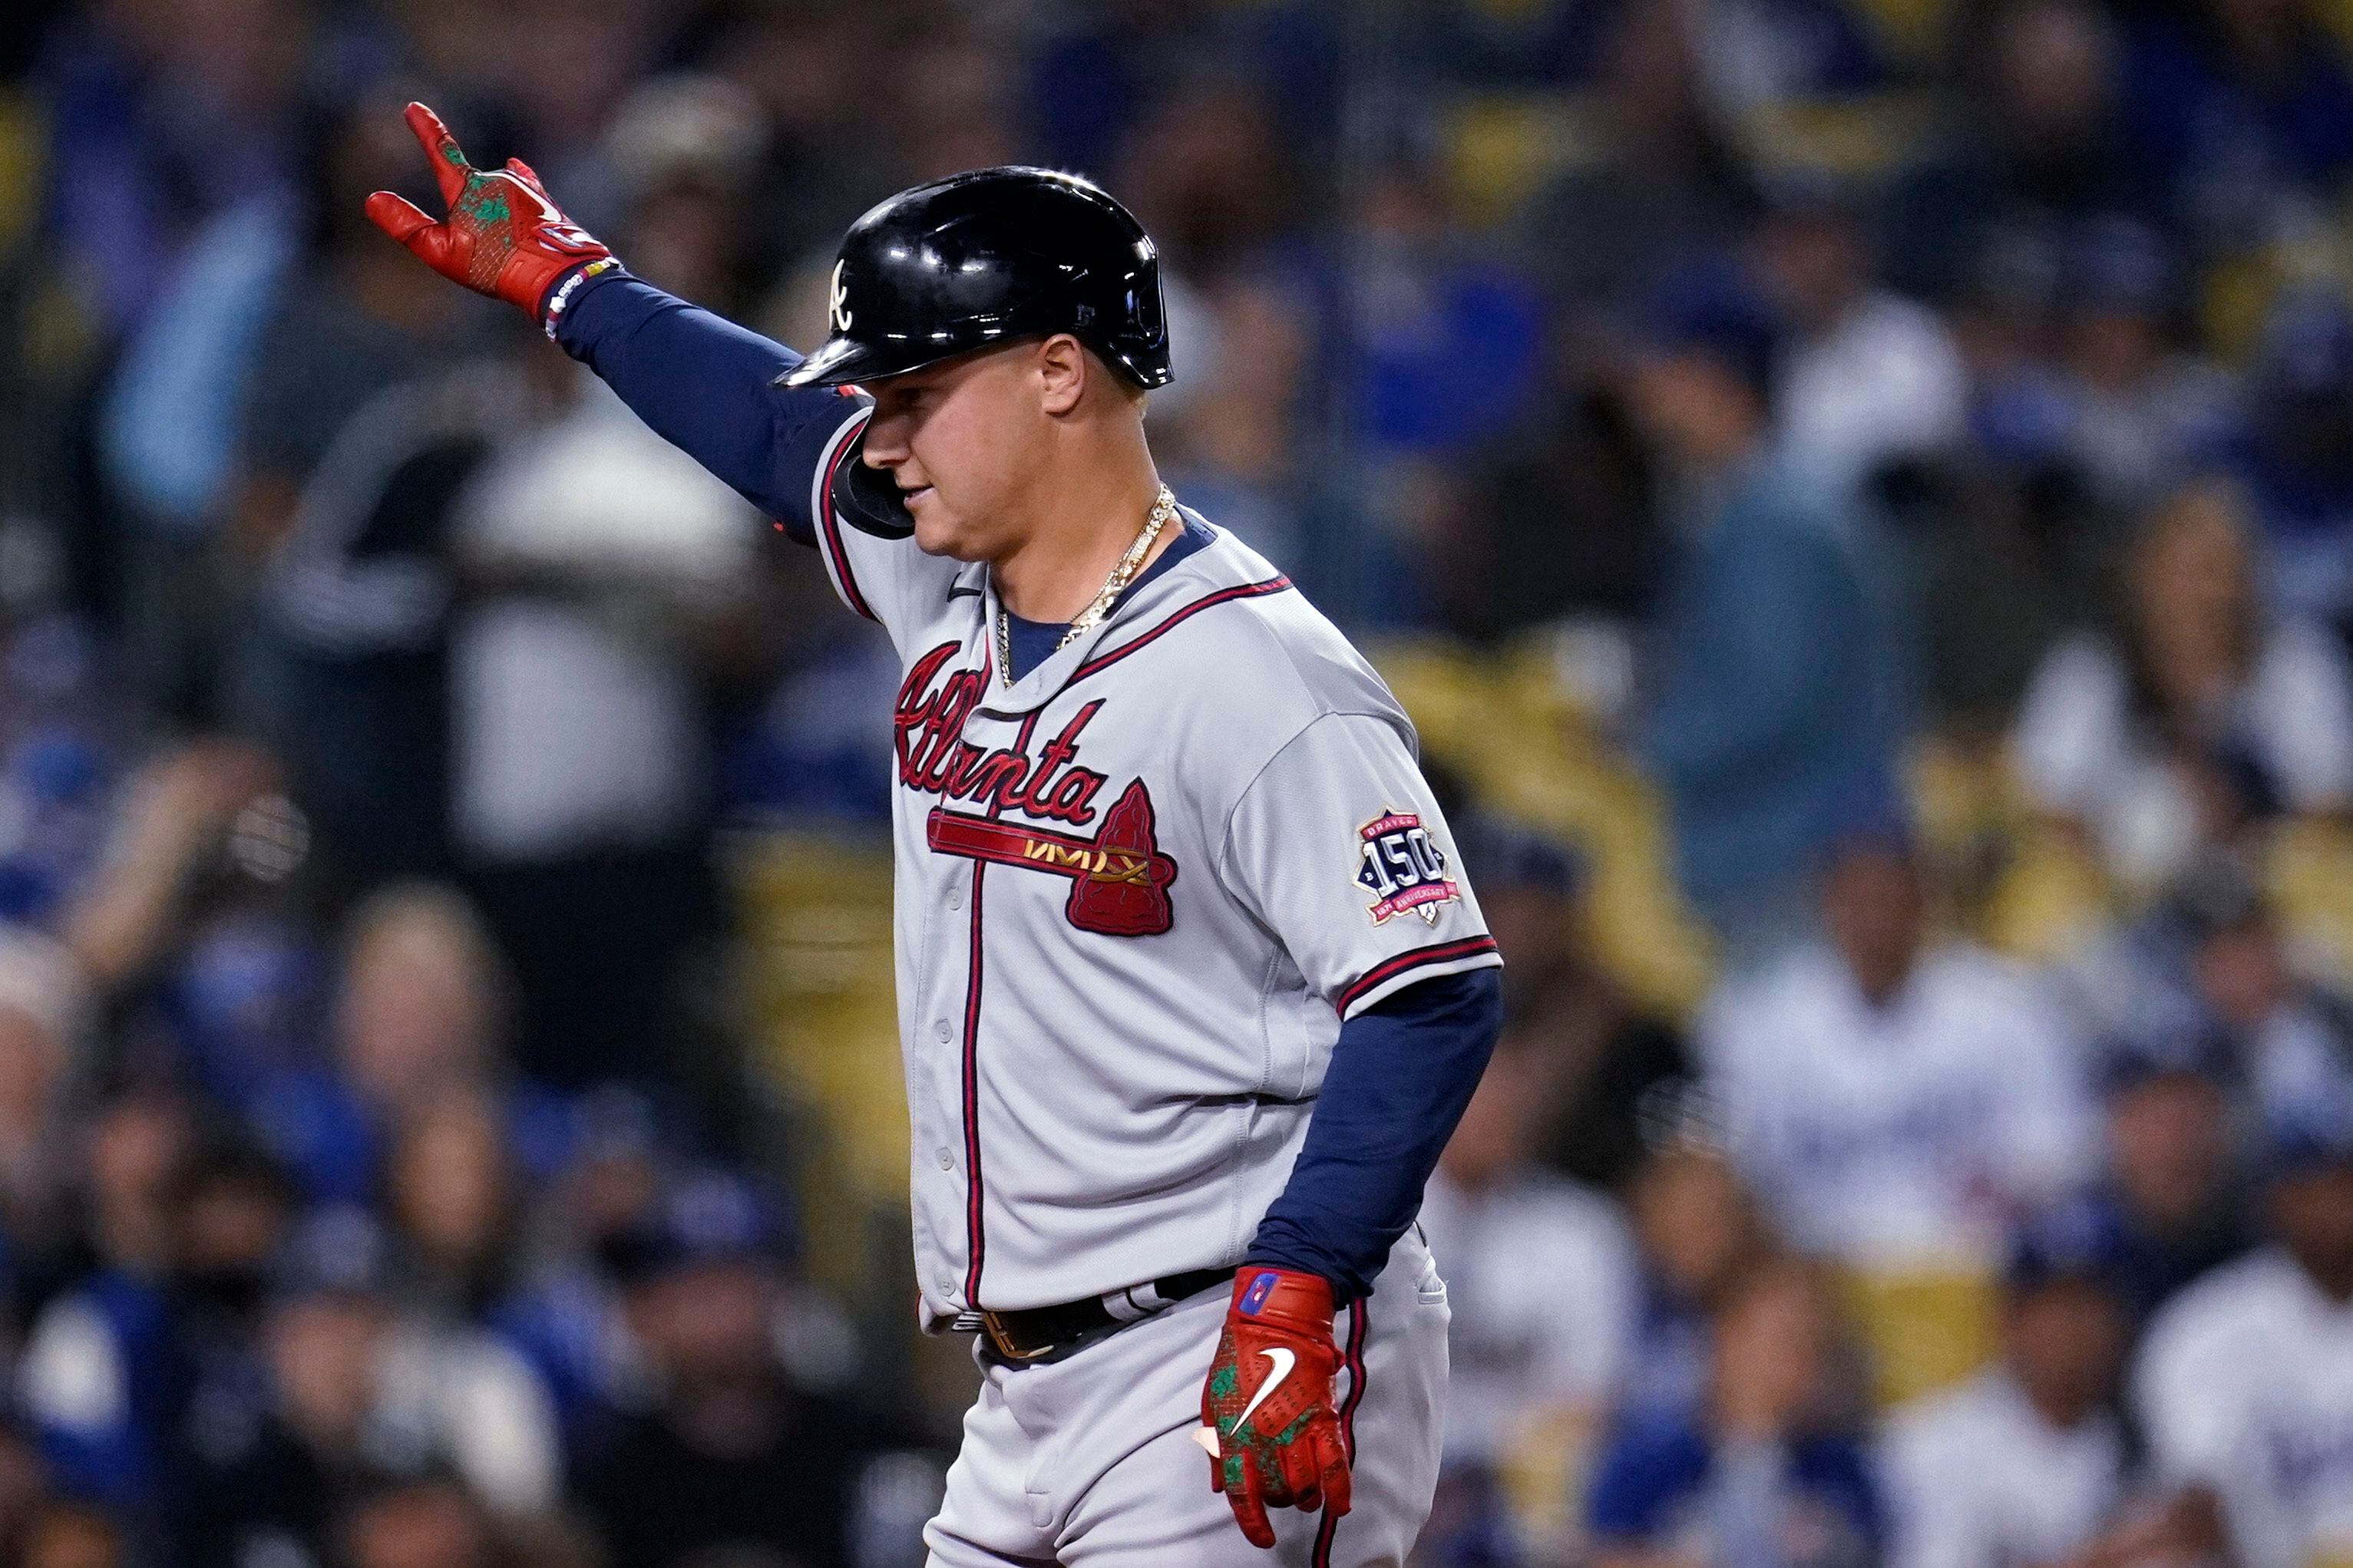 Albies breaks foot, but Braves beat Nats for 12th straight – KGET 17